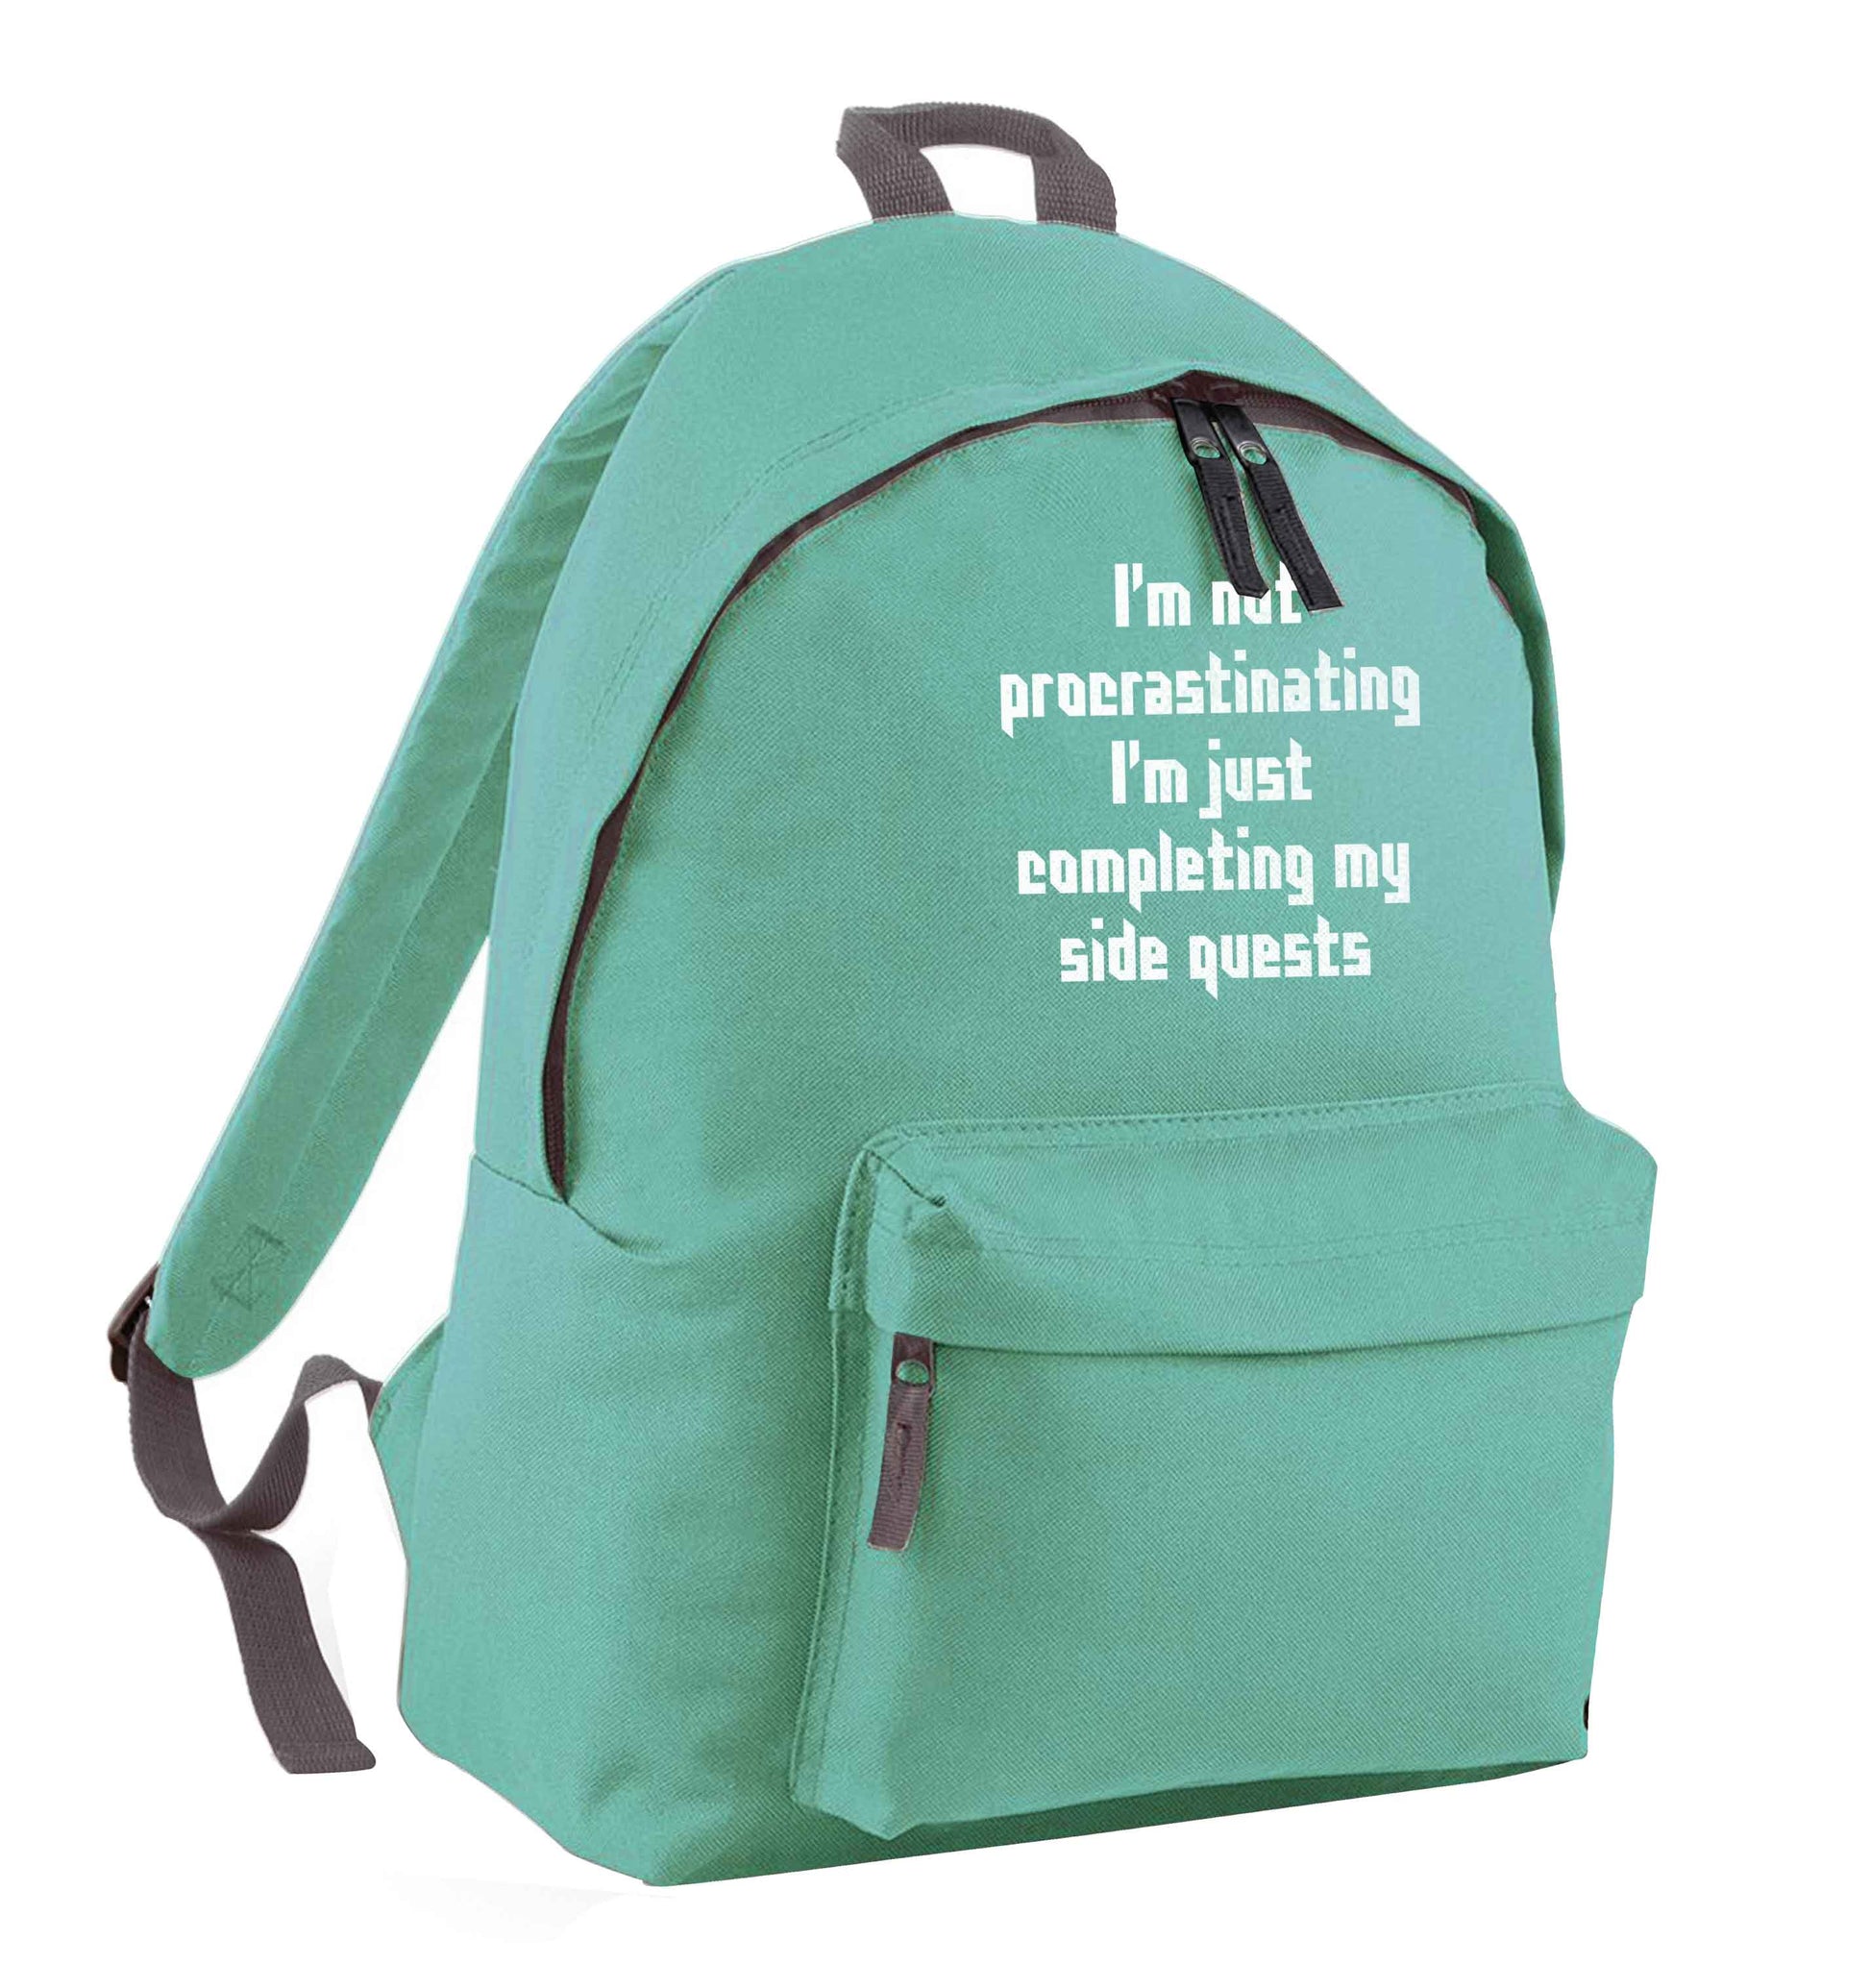 I'm not procrastinating I'm just completing my side quests mint adults backpack